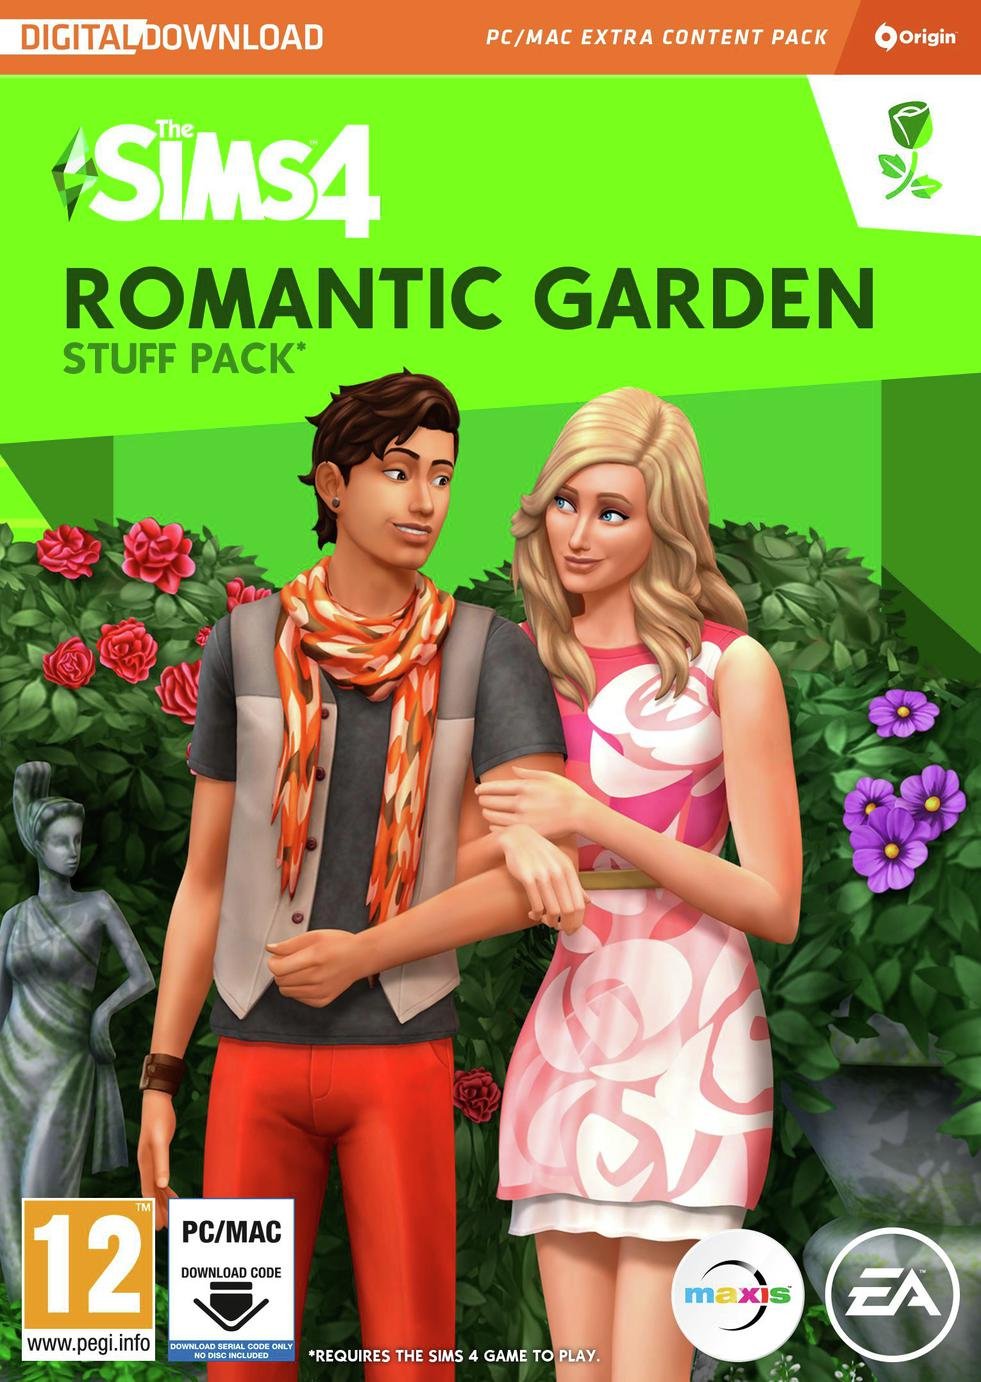 The Sims 4 Romantic Garden Stuff Pack PC Game